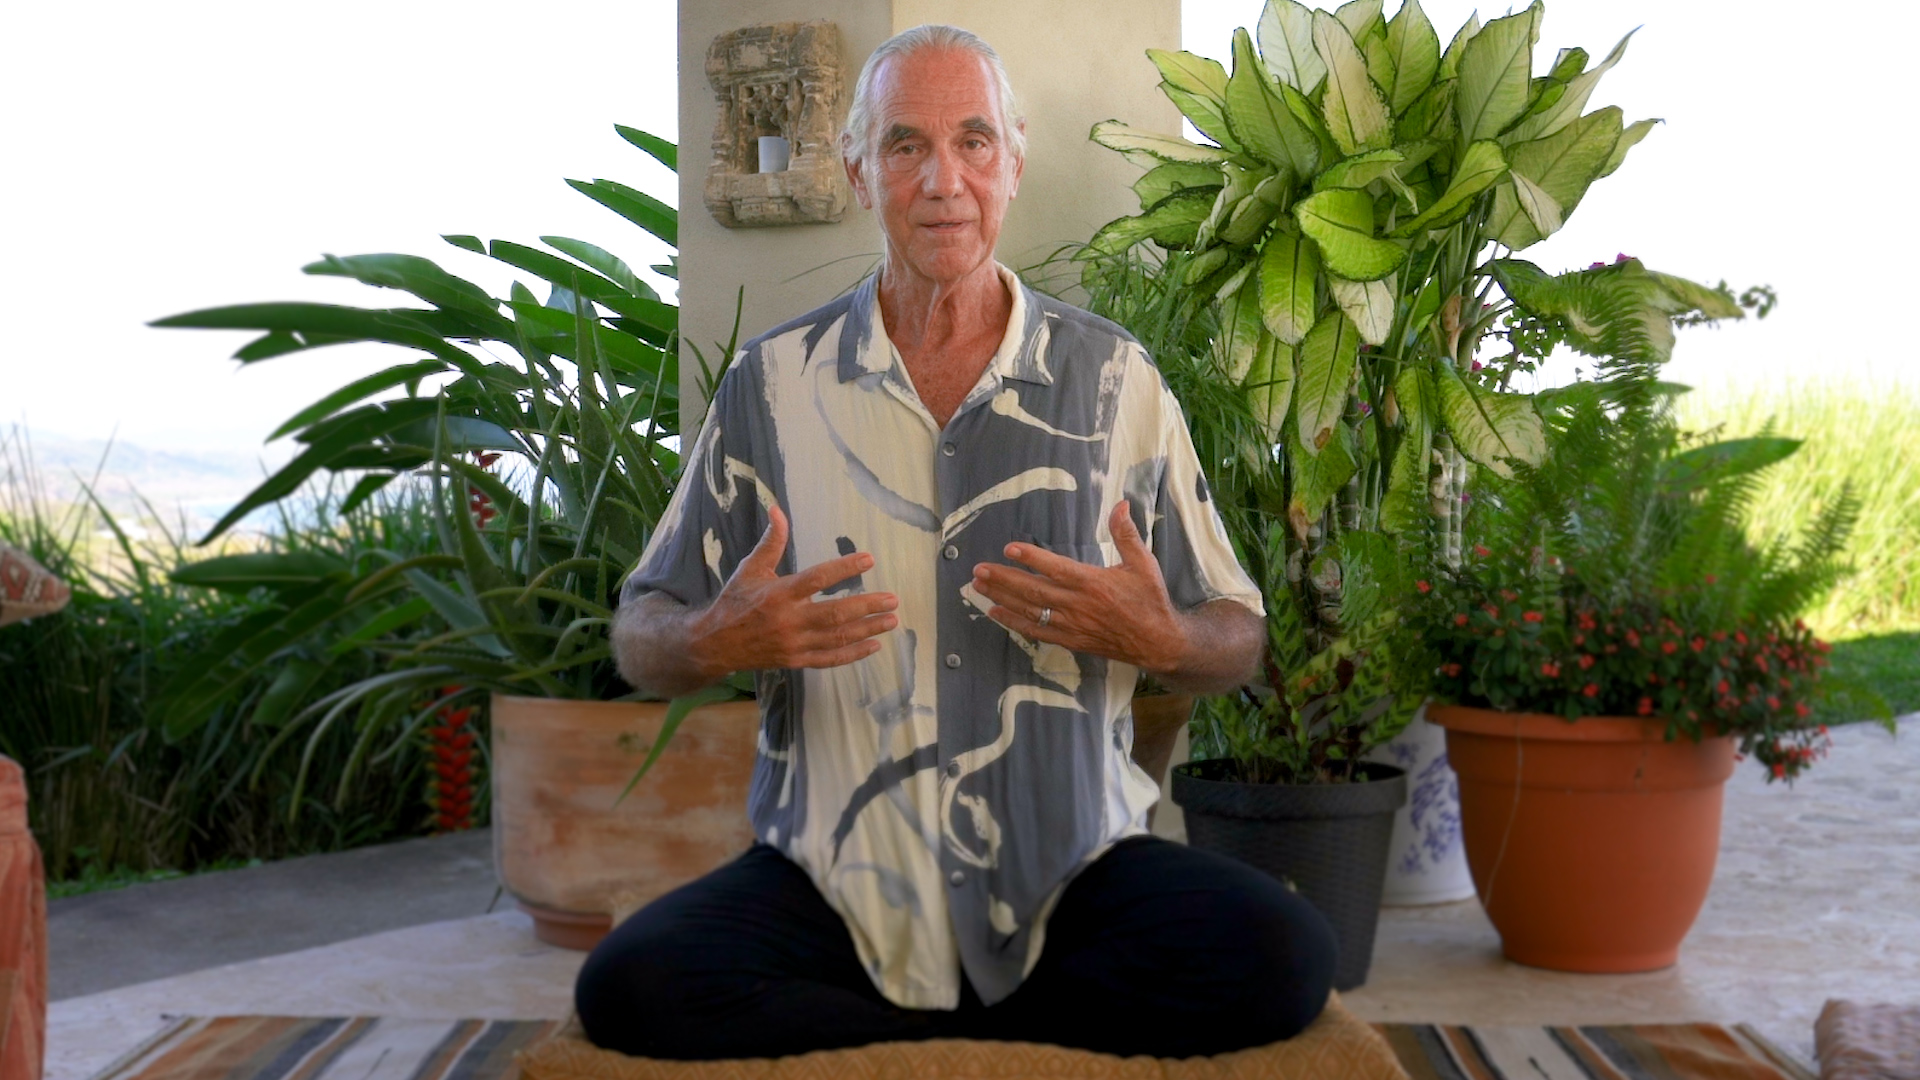 Will Johnson explaining how to sit in the half lotus meditation position